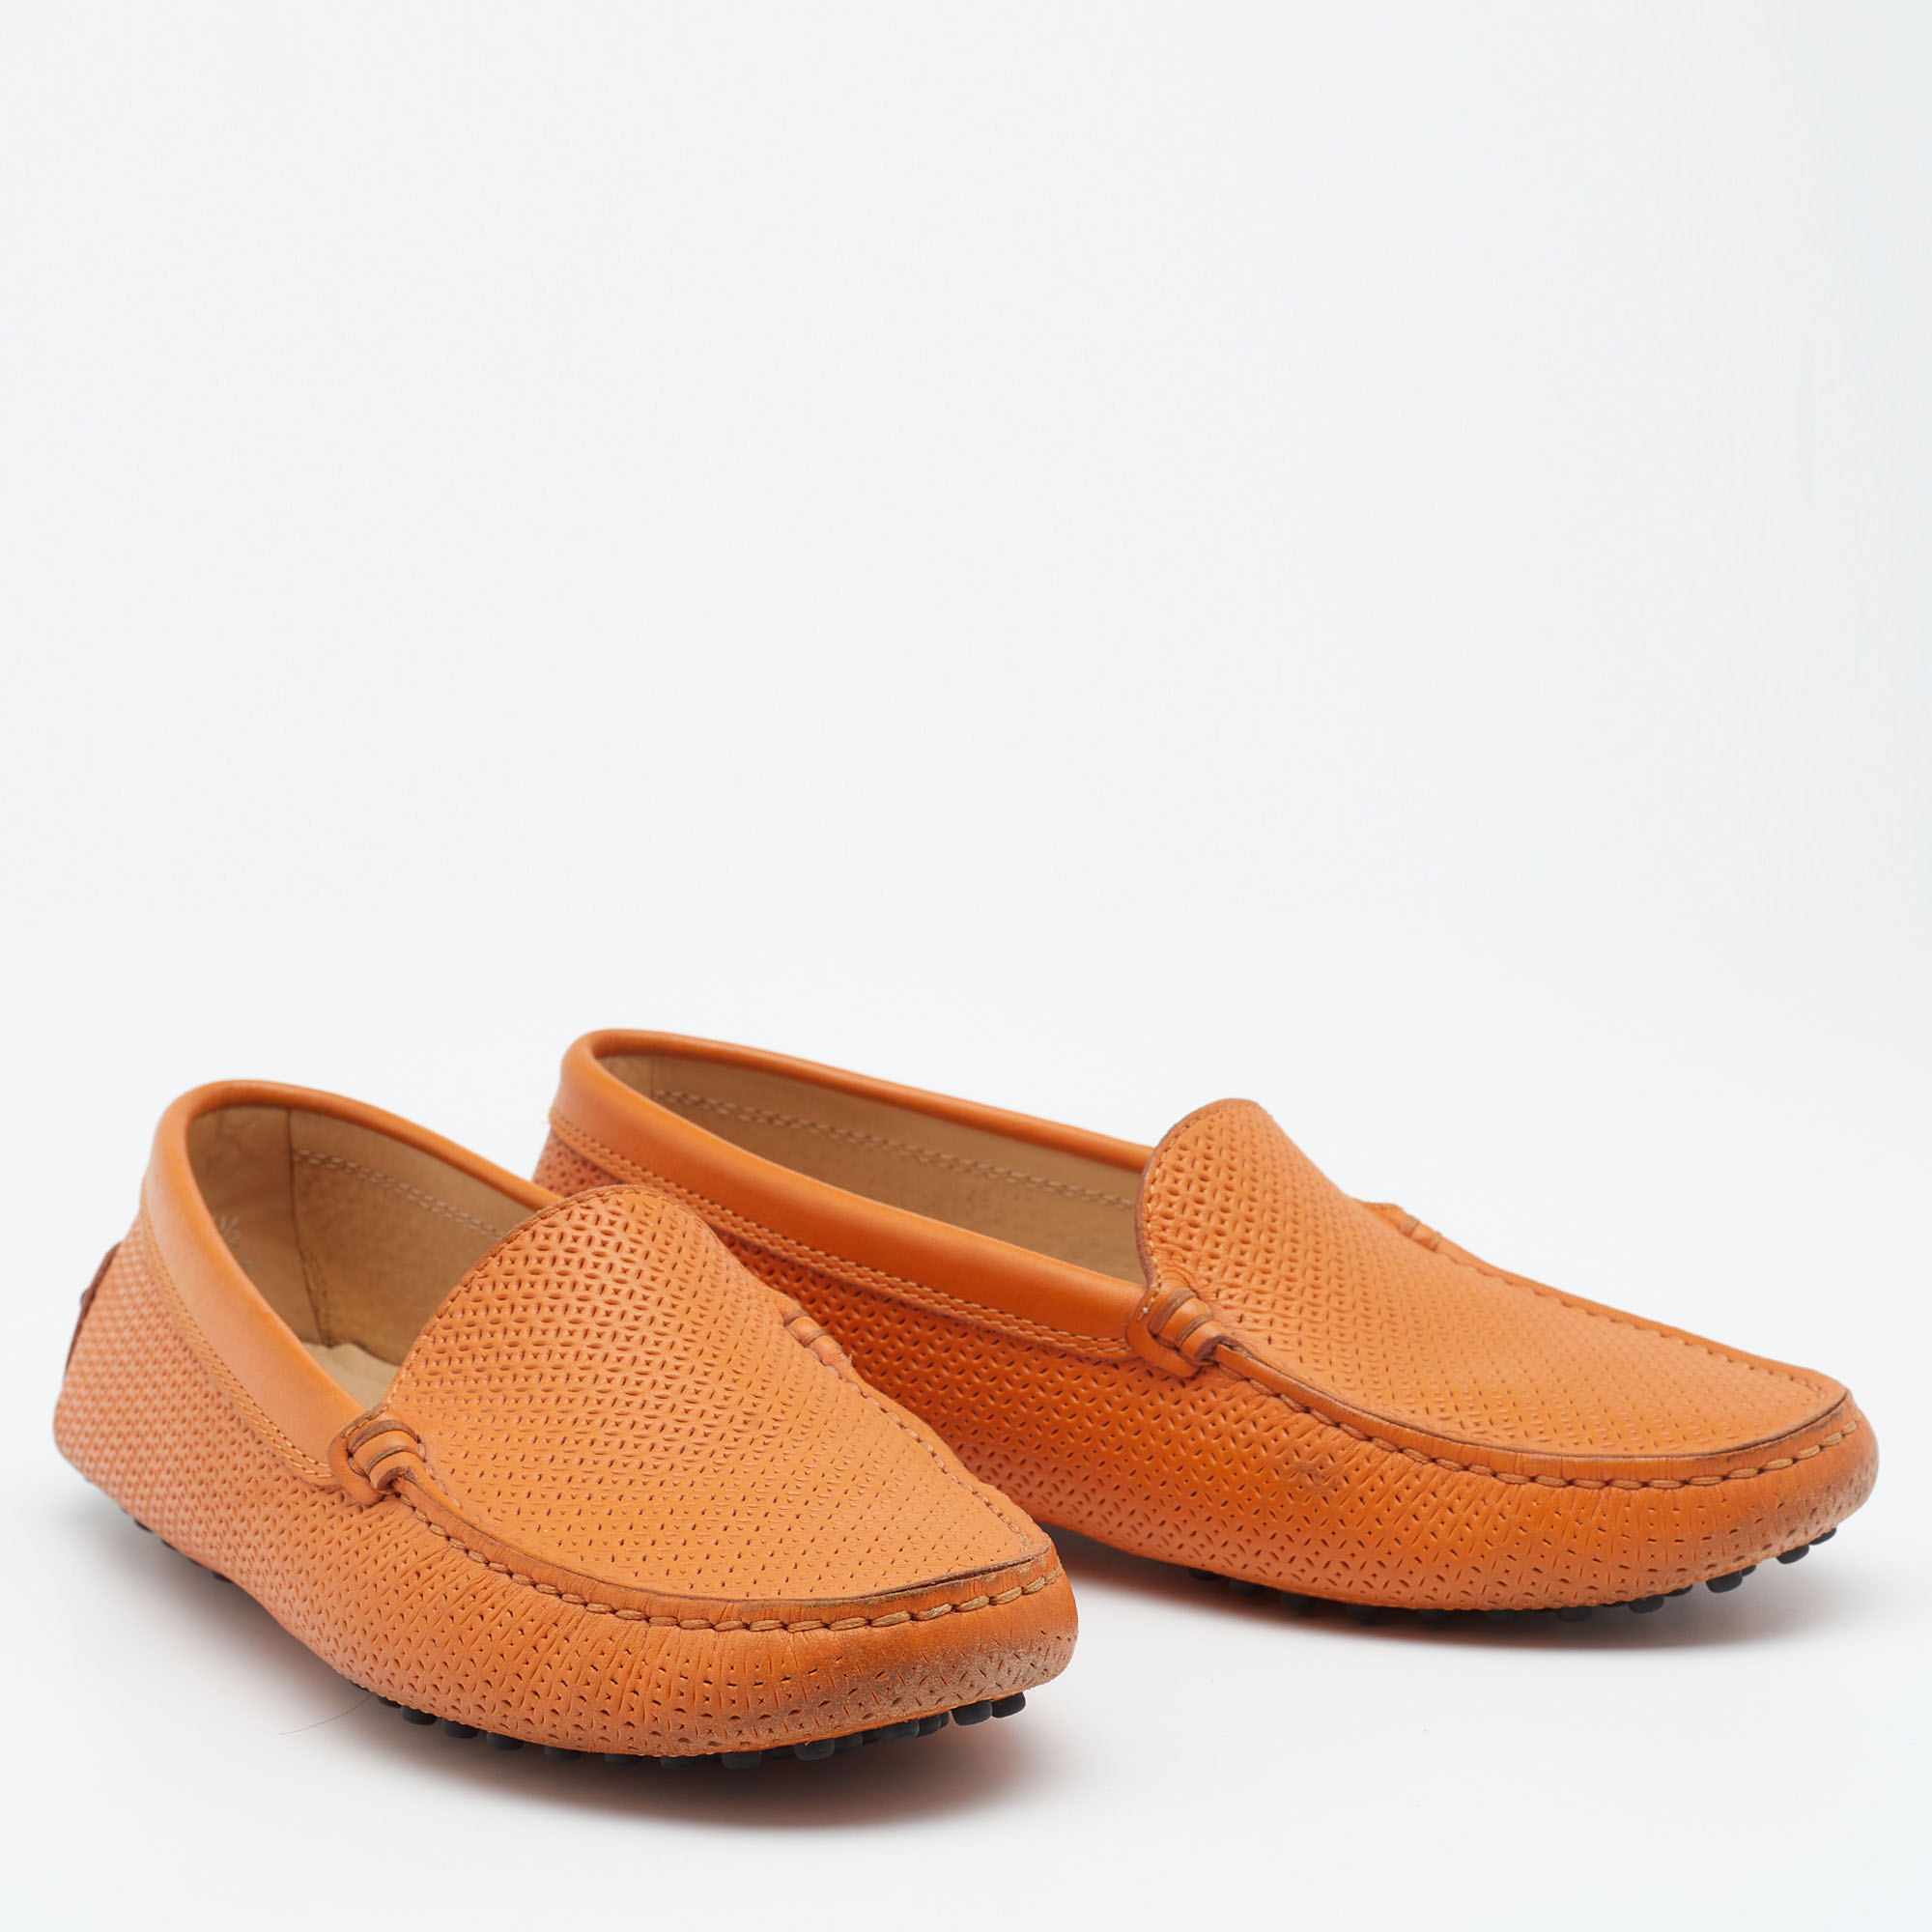 Tod's Orange Perforated Leather Slip On Loafers Size 36.5